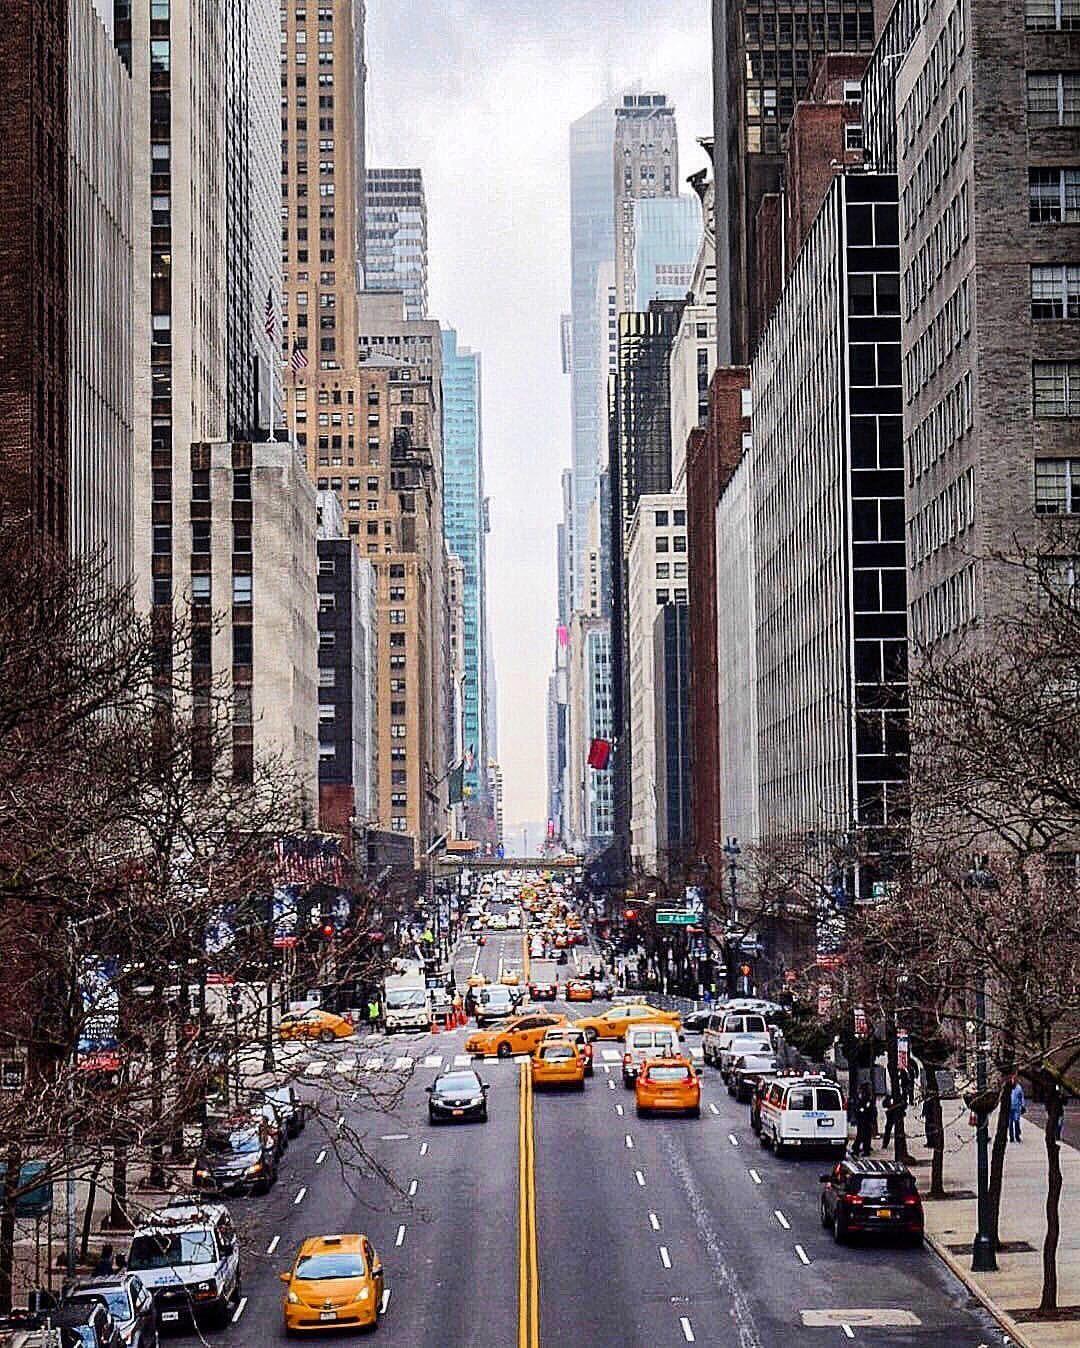 East 42nd Street New York City. Places to visit one day